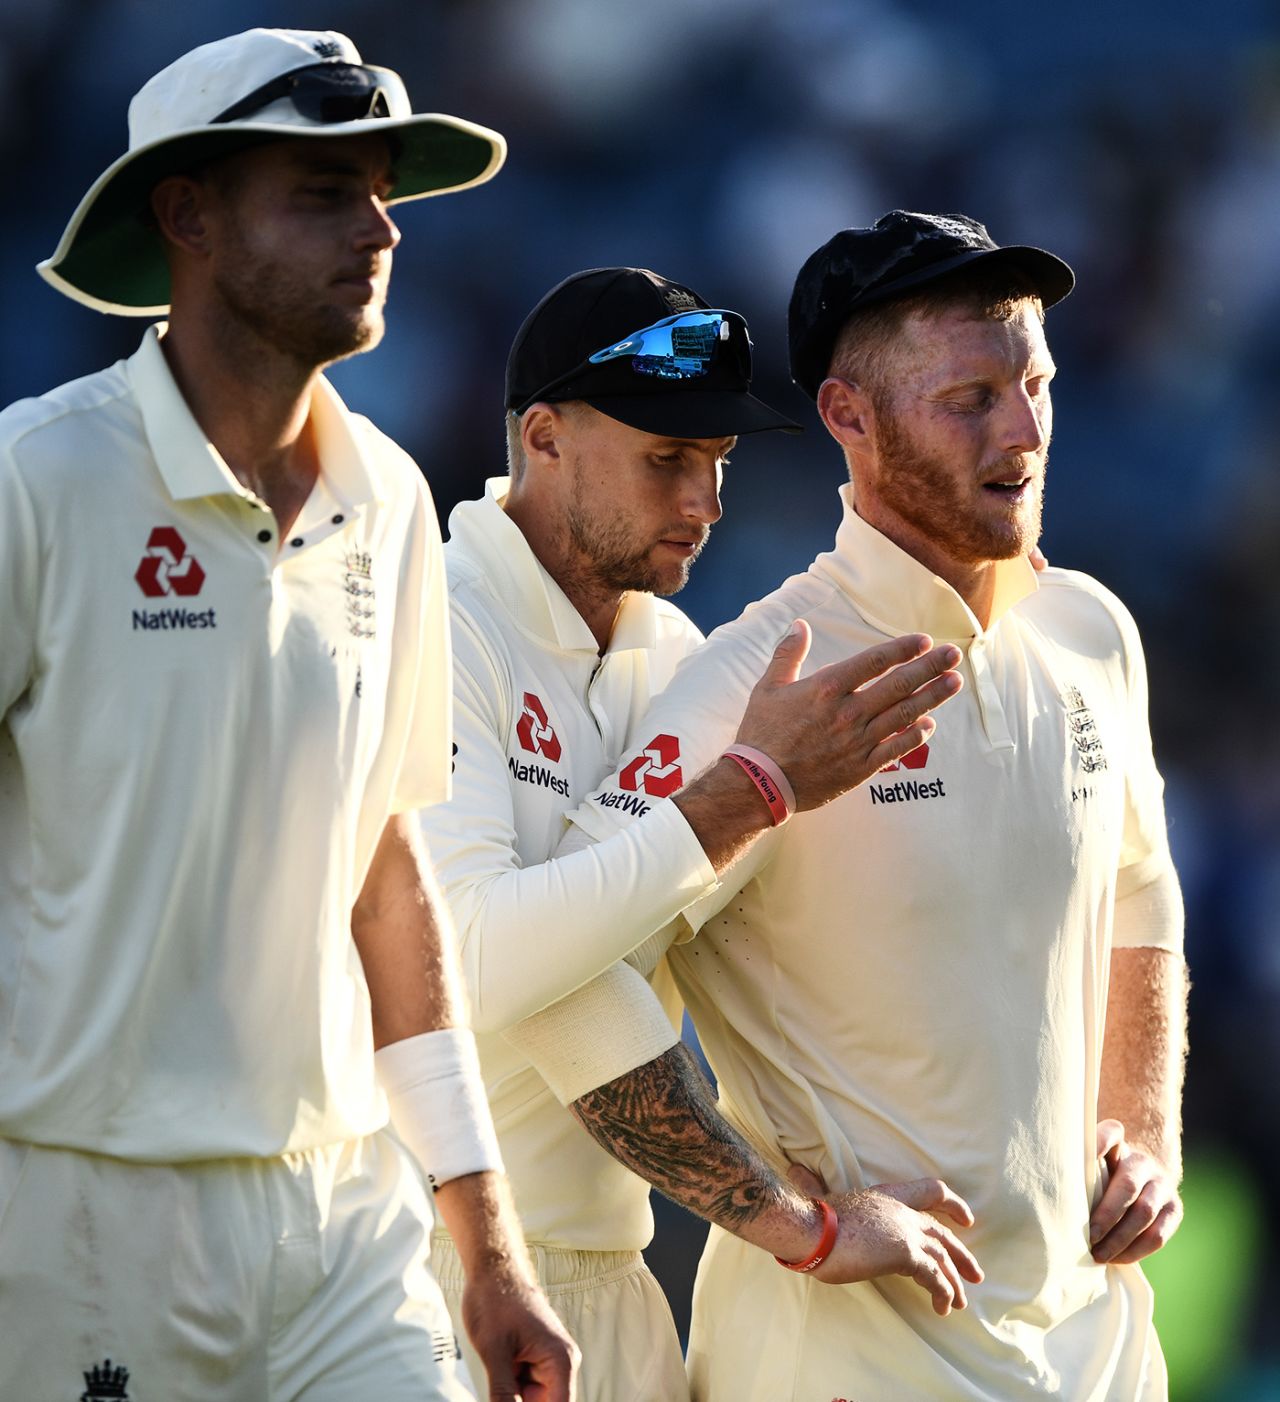 Stuart Broad, Joe Root and Ben Stokes leave the field, England v Australia, 3rd Ashes Test, Headingley, August 23, 2019